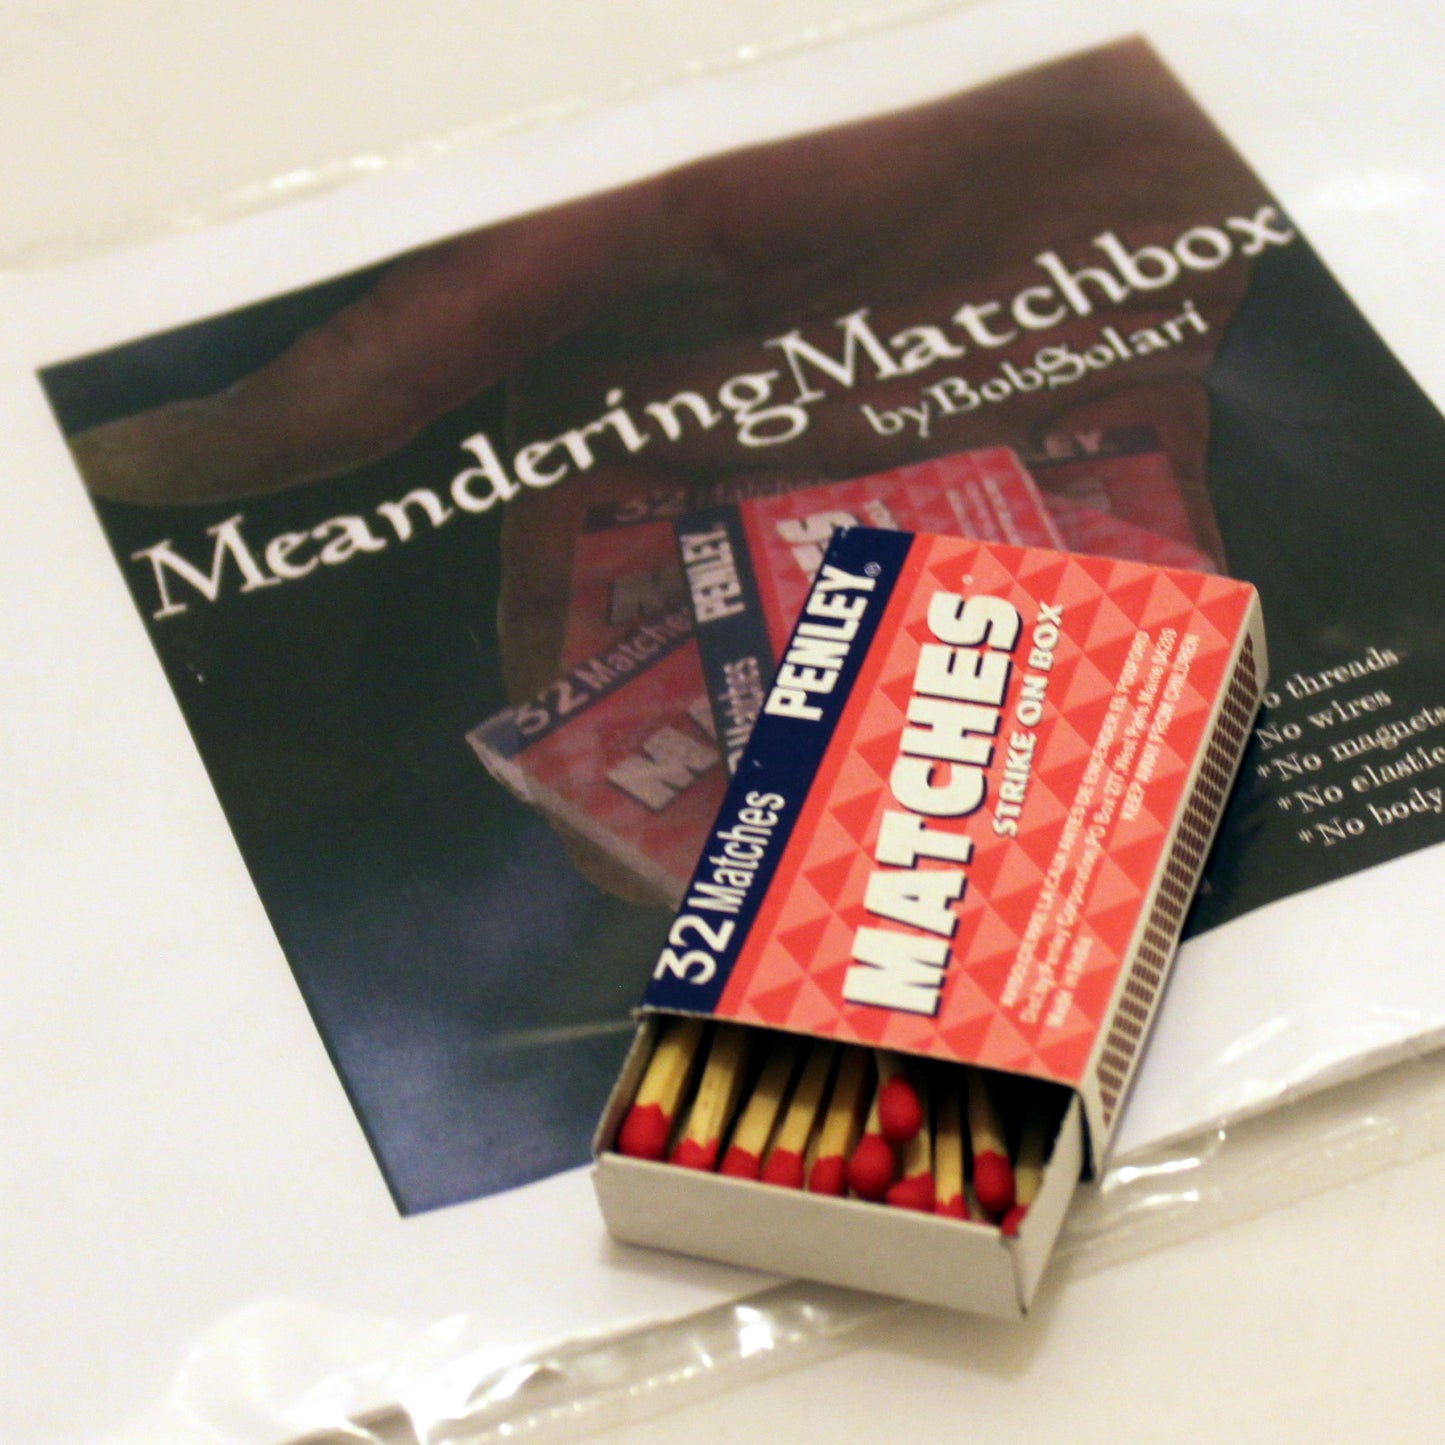 Meandering Match Box